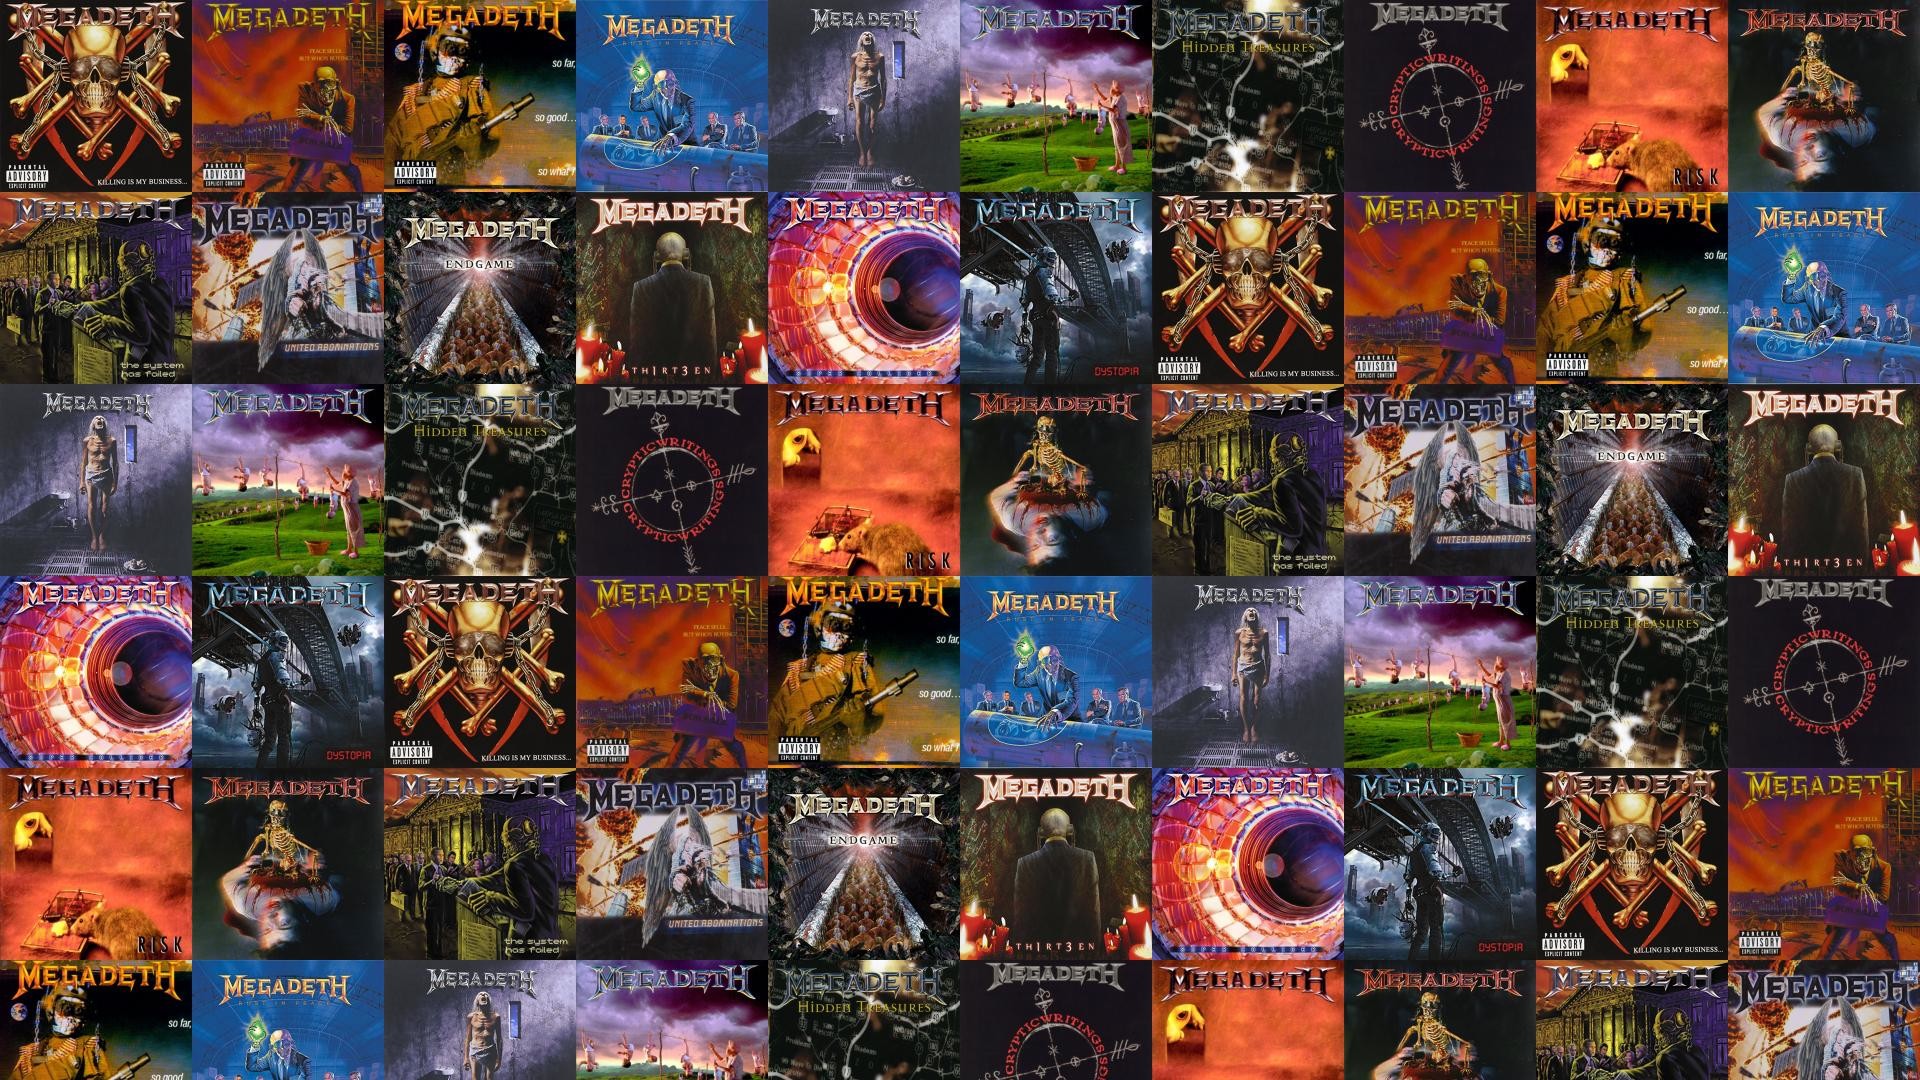 1920x1080 Download this free wallpaper with images of Megadeth – Killing Is My  Business, Megadeth – Peace Sells, Megadeth – So Far So Good, Megadeth –  Rust In Peace, ...